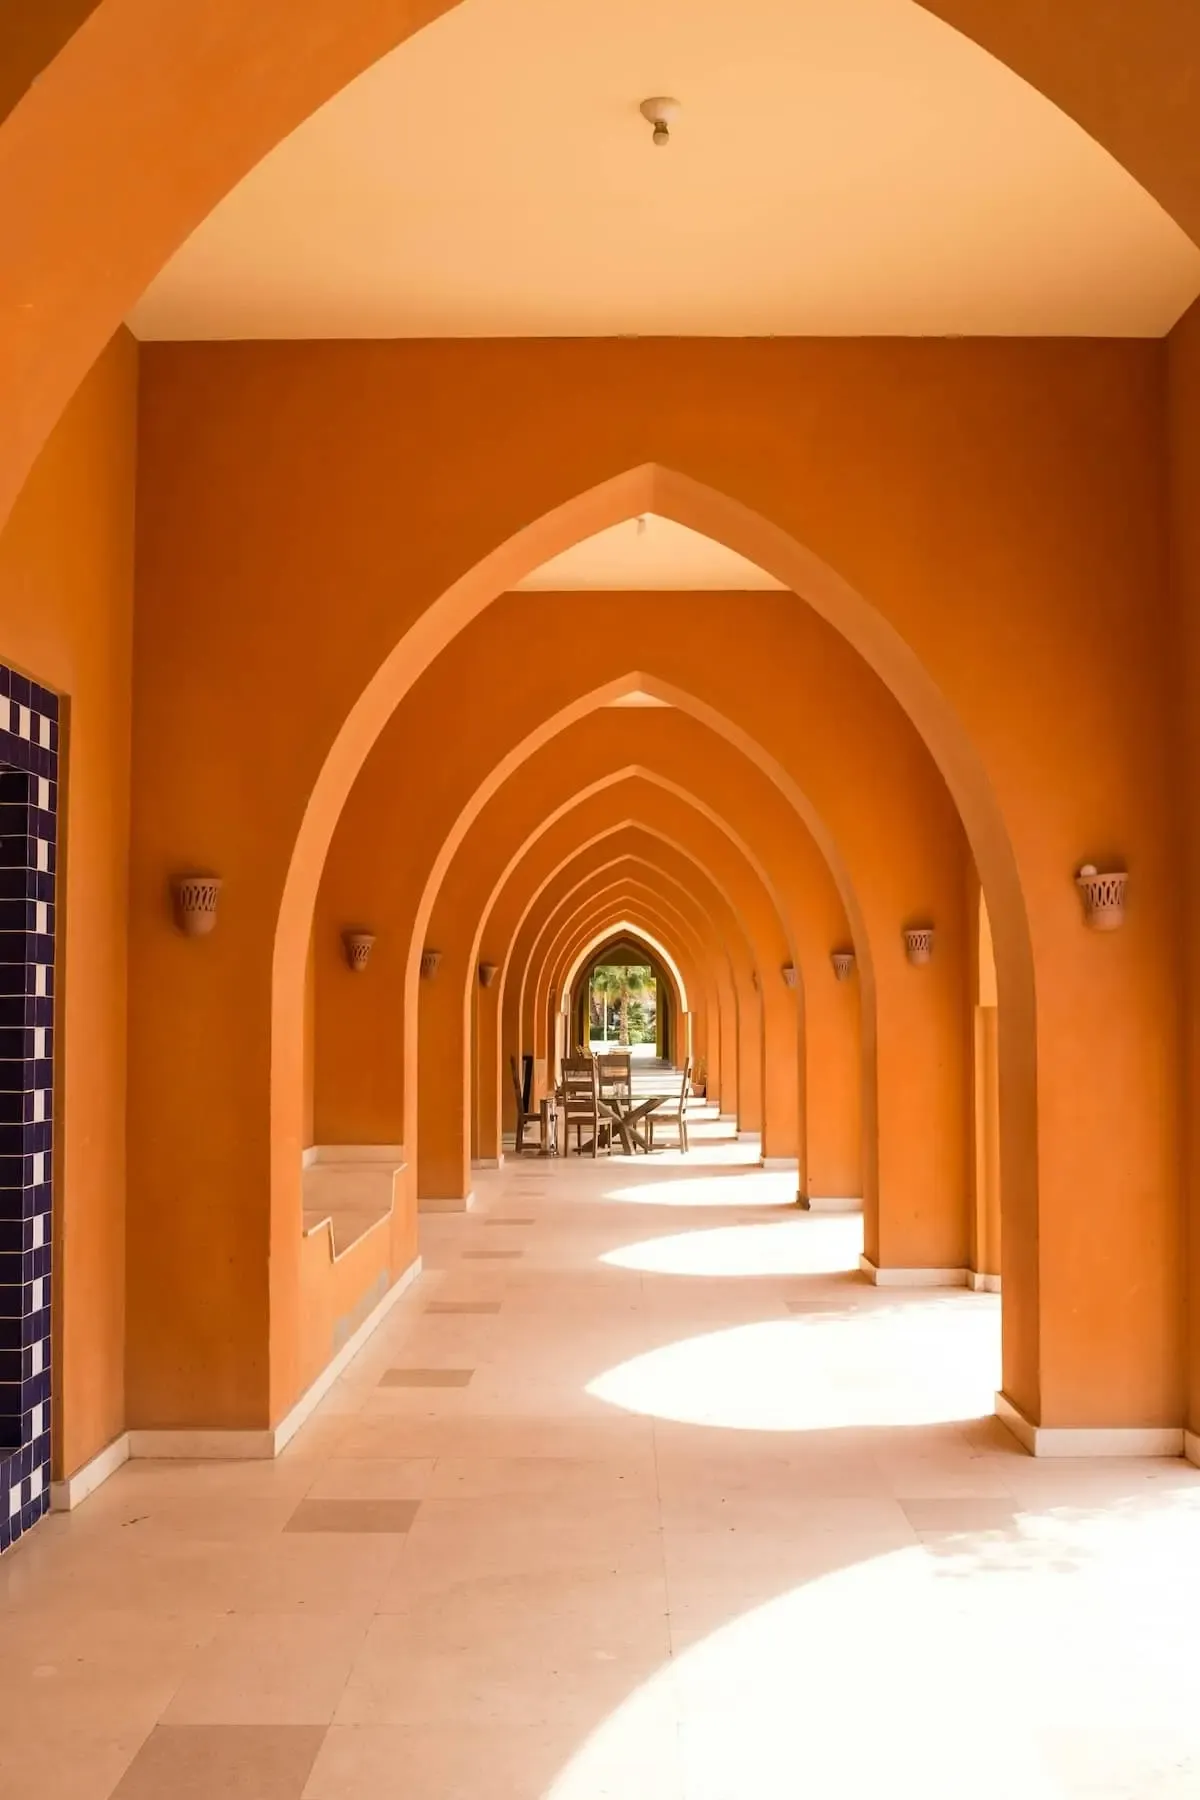 a hallway of arches during a bright day